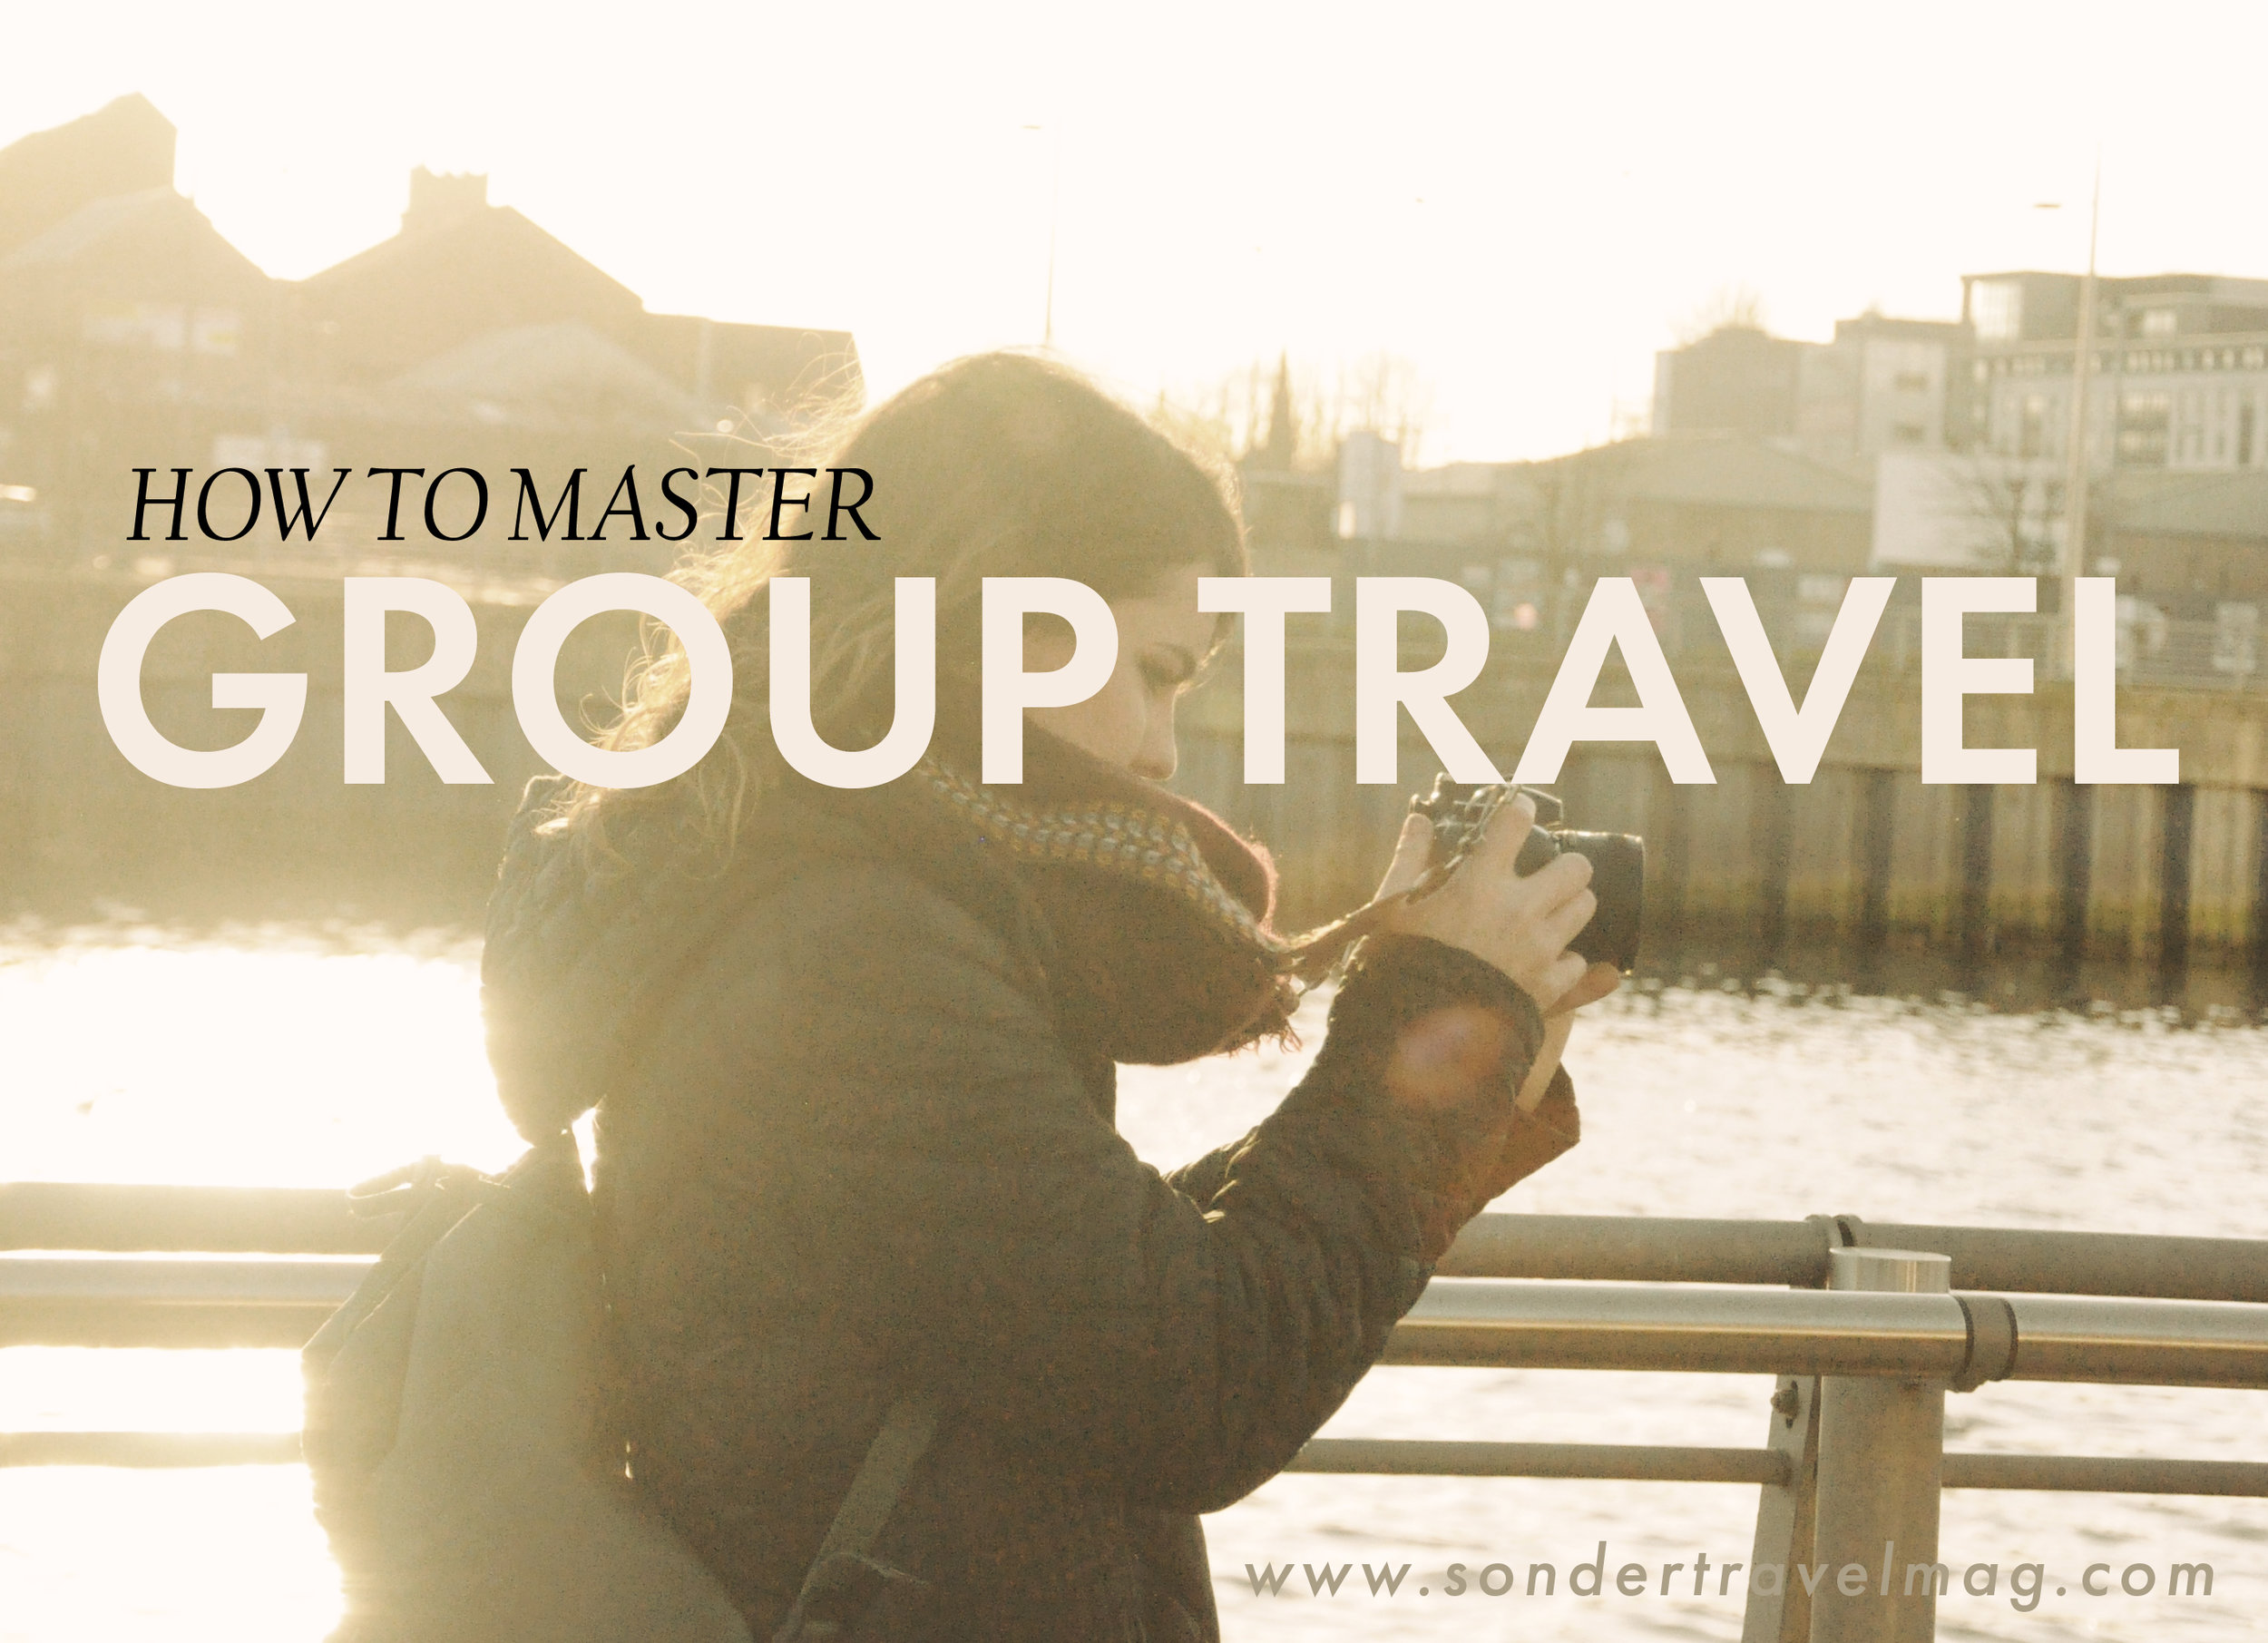 How to Master Group Travel